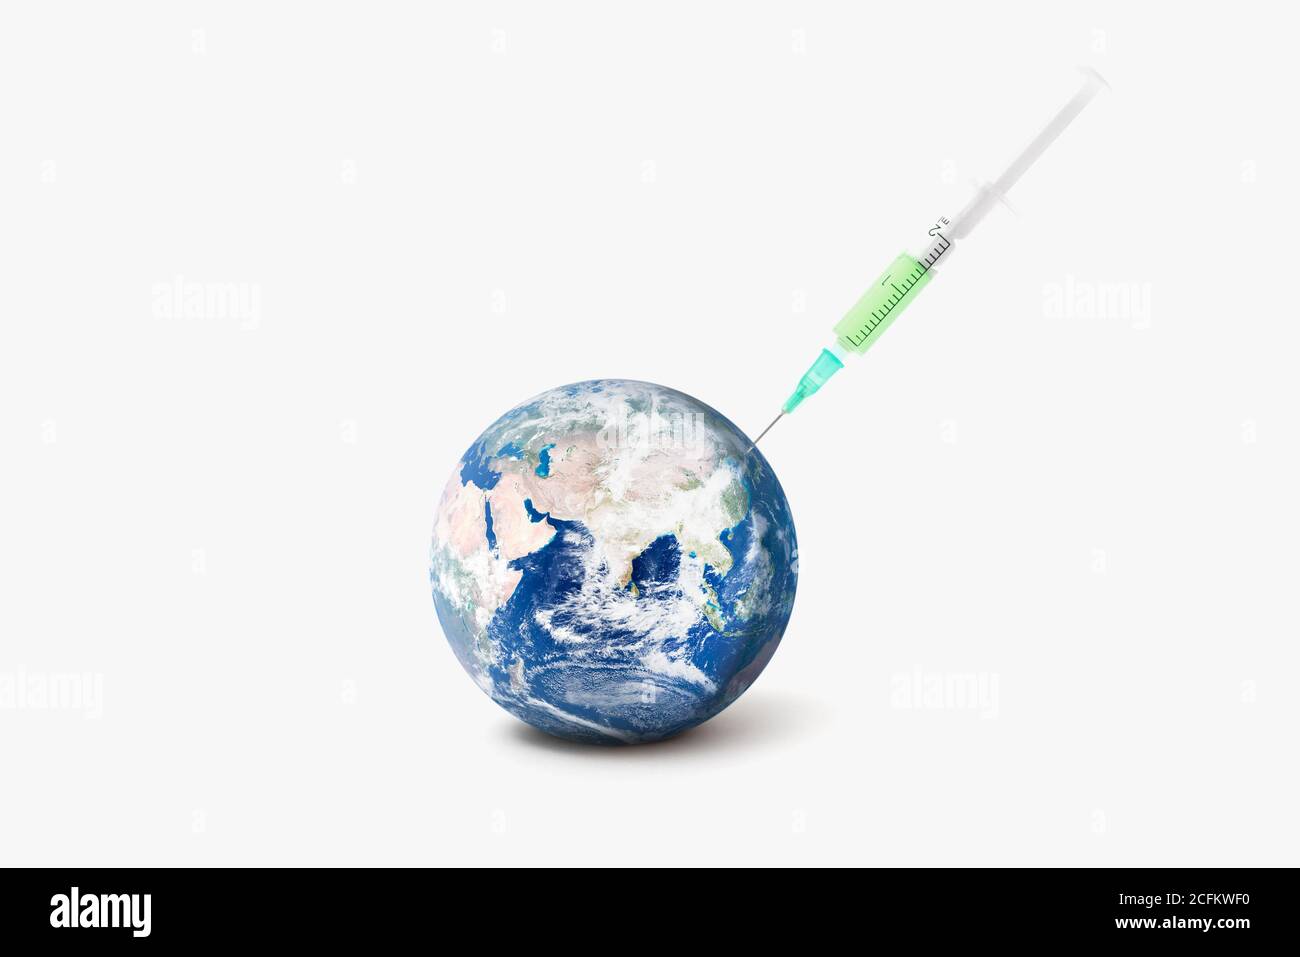 Global vaccine against the virus. global pandemic, abstract earth globe and syringe. Elements of this image furnished by NASA. Stock Photo